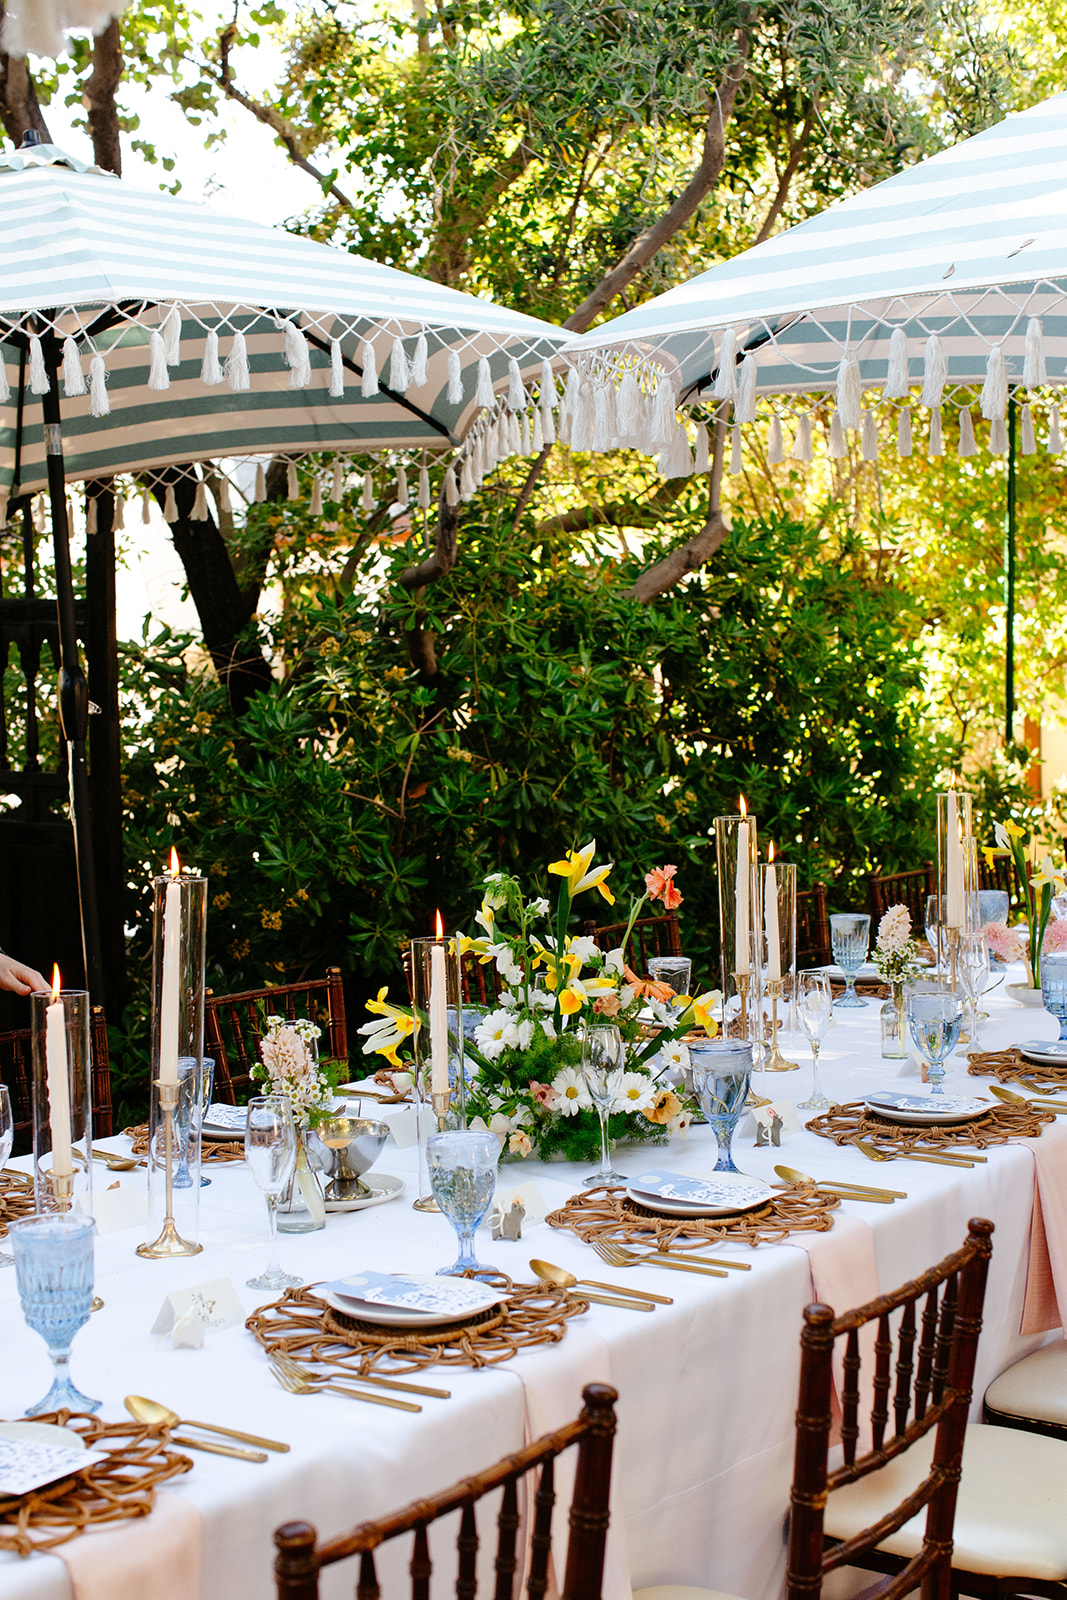 Elegant outdoor dining setup with long tables under white canopies, decorated with yellow lilies, candles, and gold cutlery for a garden party wedding